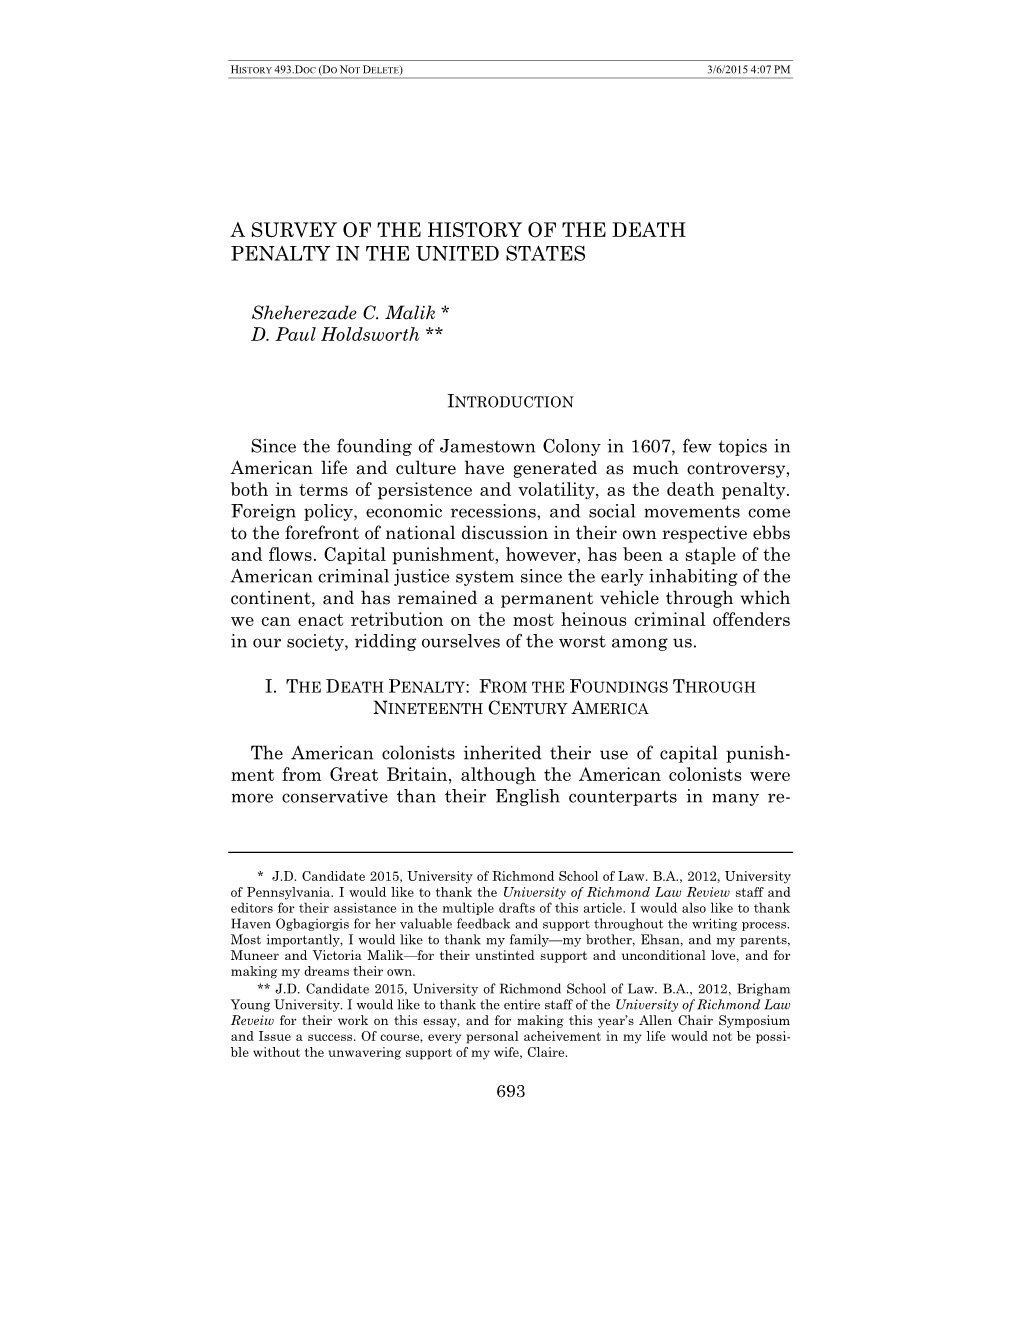 A Survey of the History of the Death Penalty in the United States